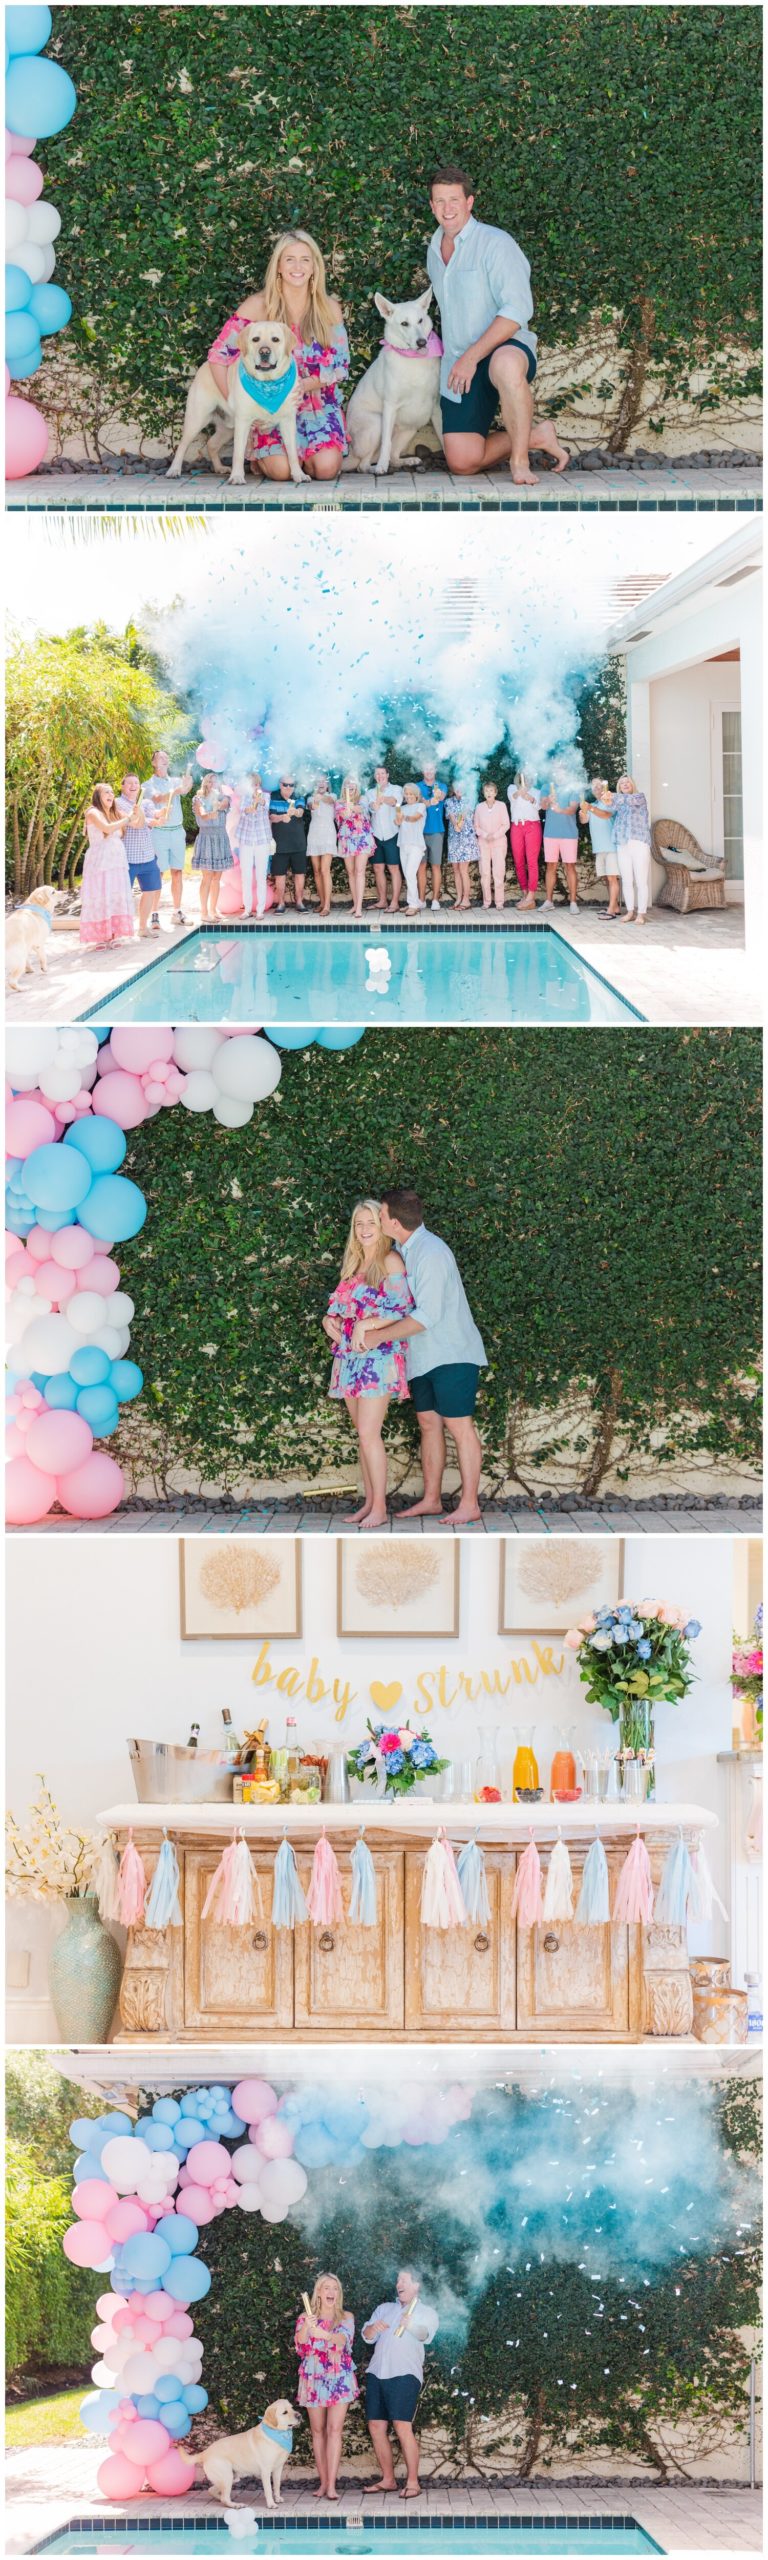 CMageePhotography_GenderReveal_Tequesta_0004.jpg